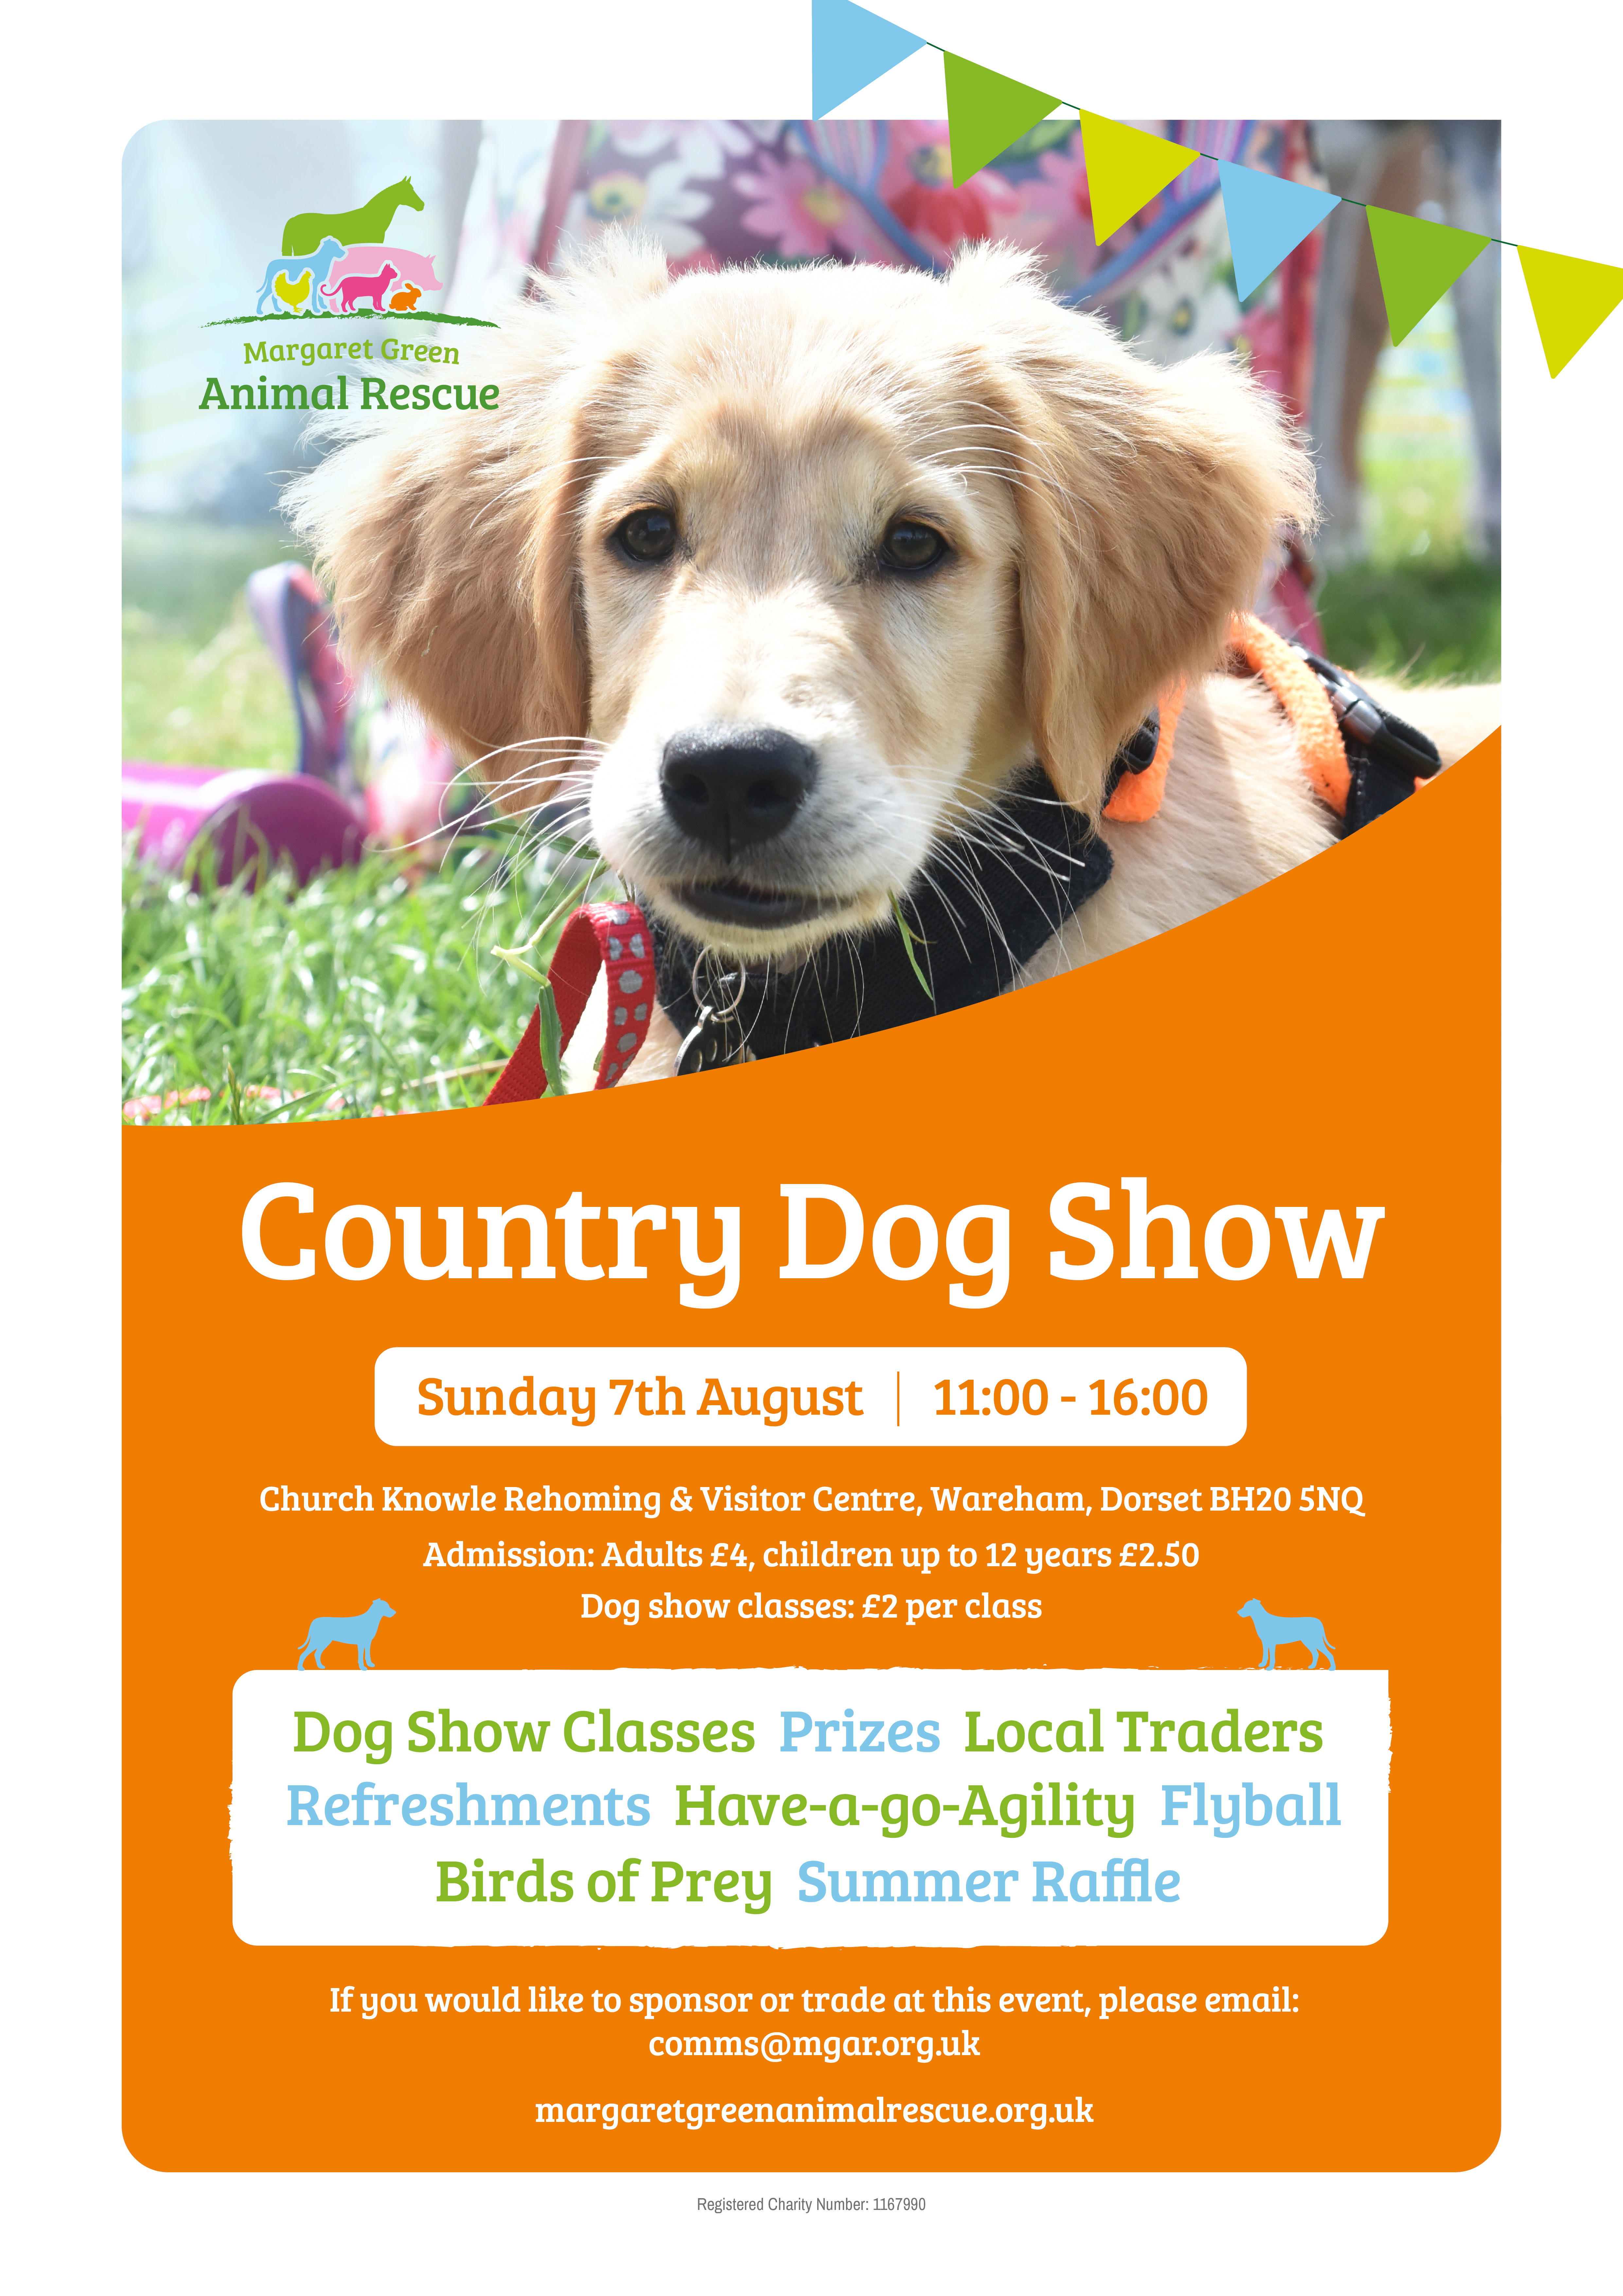 Country Dog Show Poster